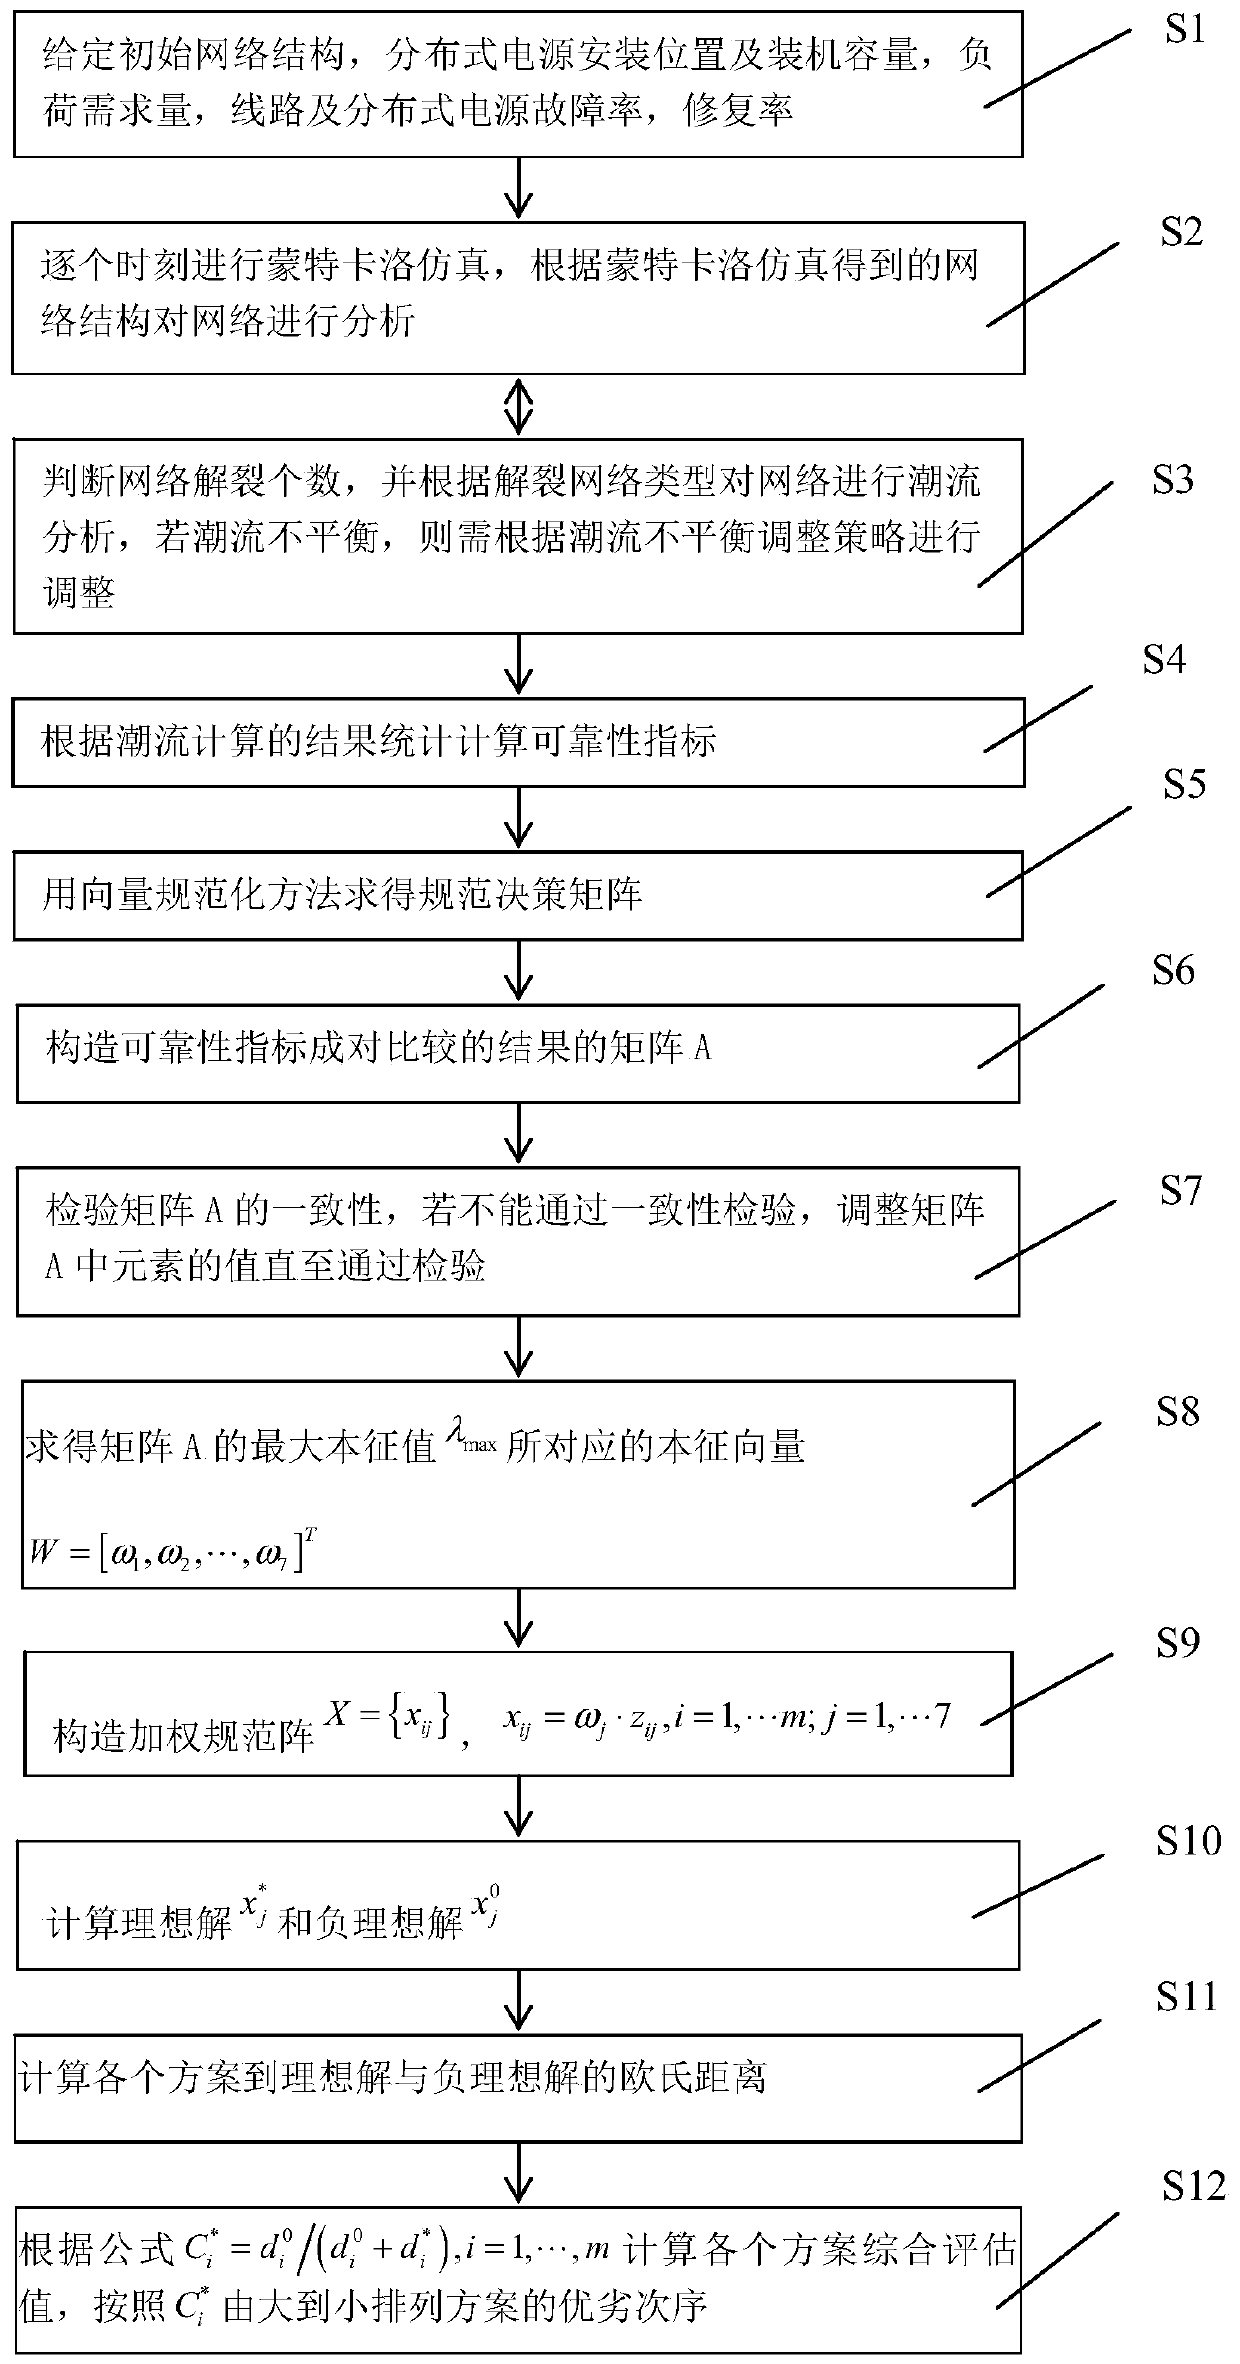 Reliability assessment method of active distribution network with distributed generation based on topsis method